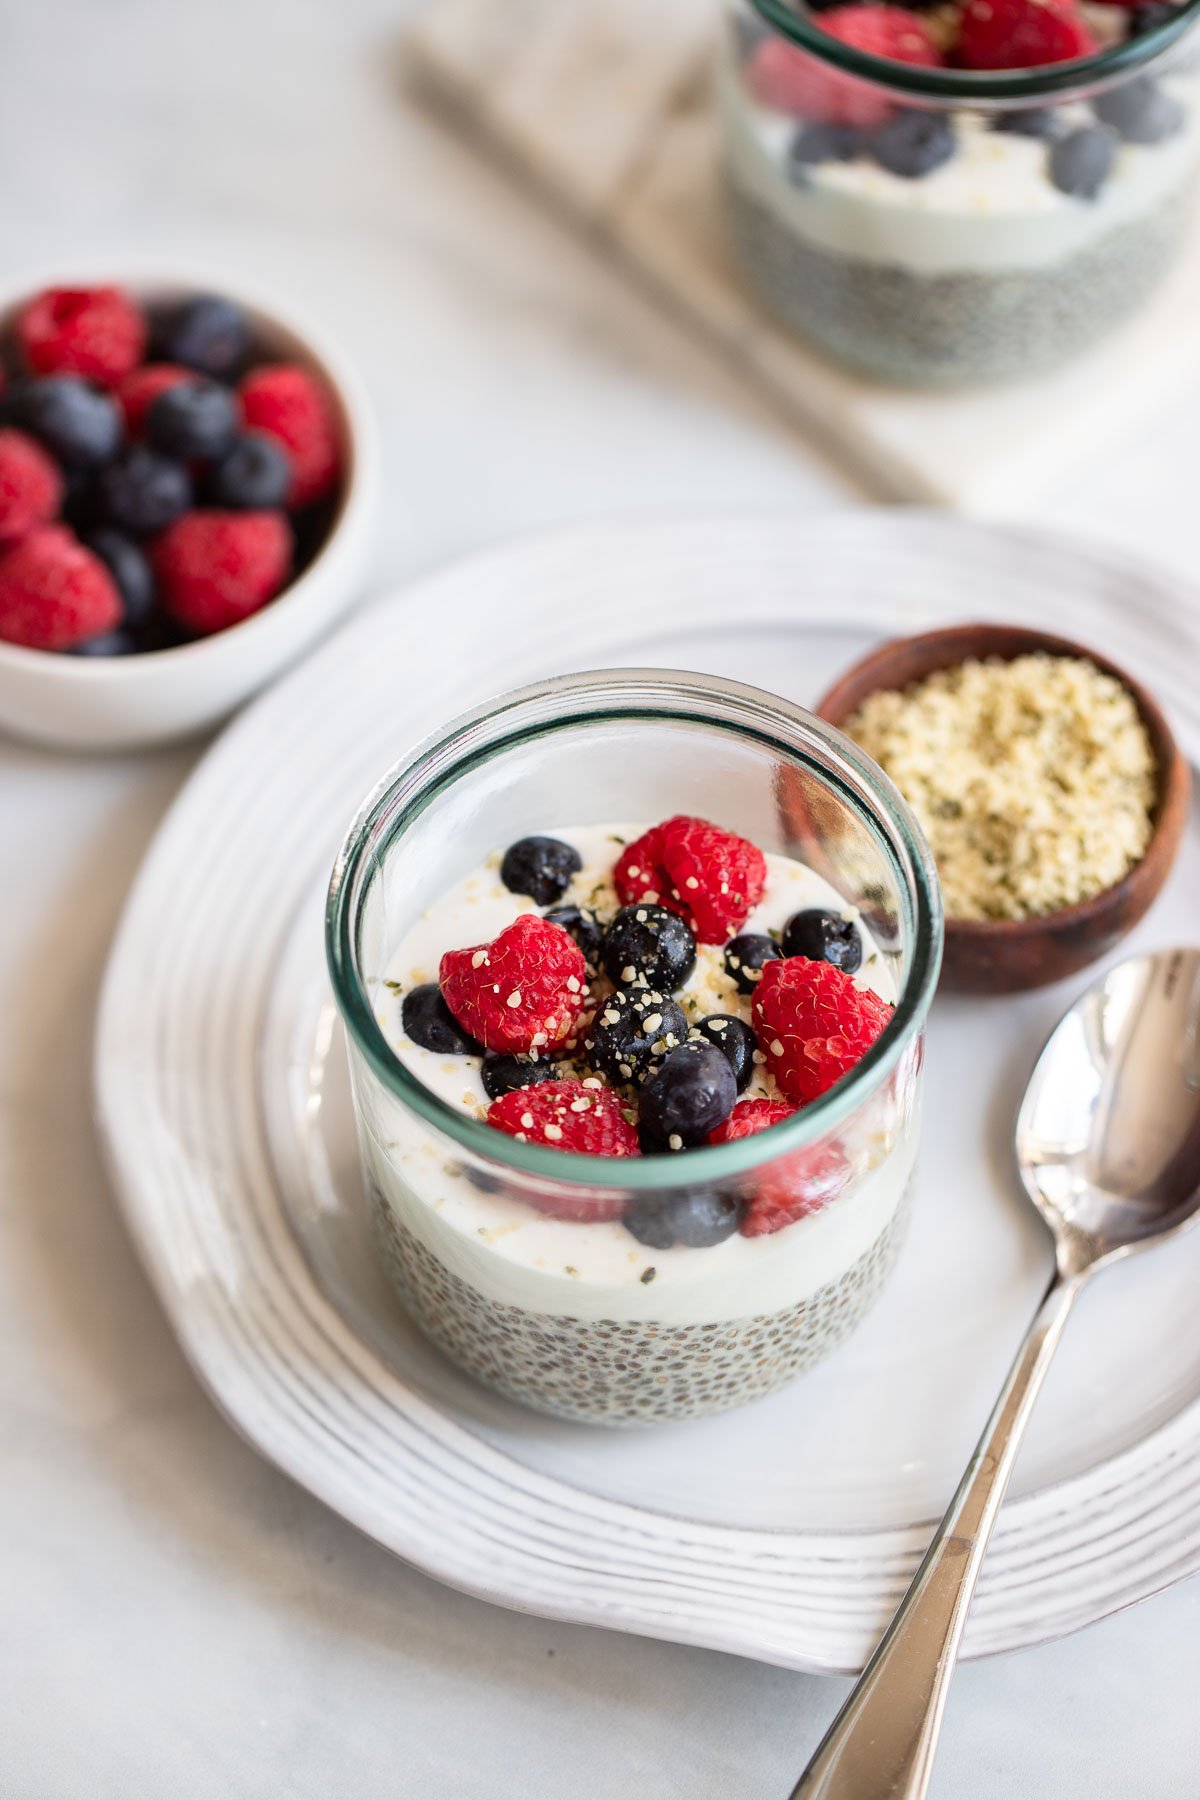 https://dietitiandebbie.com/wp-content/uploads/2023/05/Overnight-Chia-Seed-Pudding.jpg